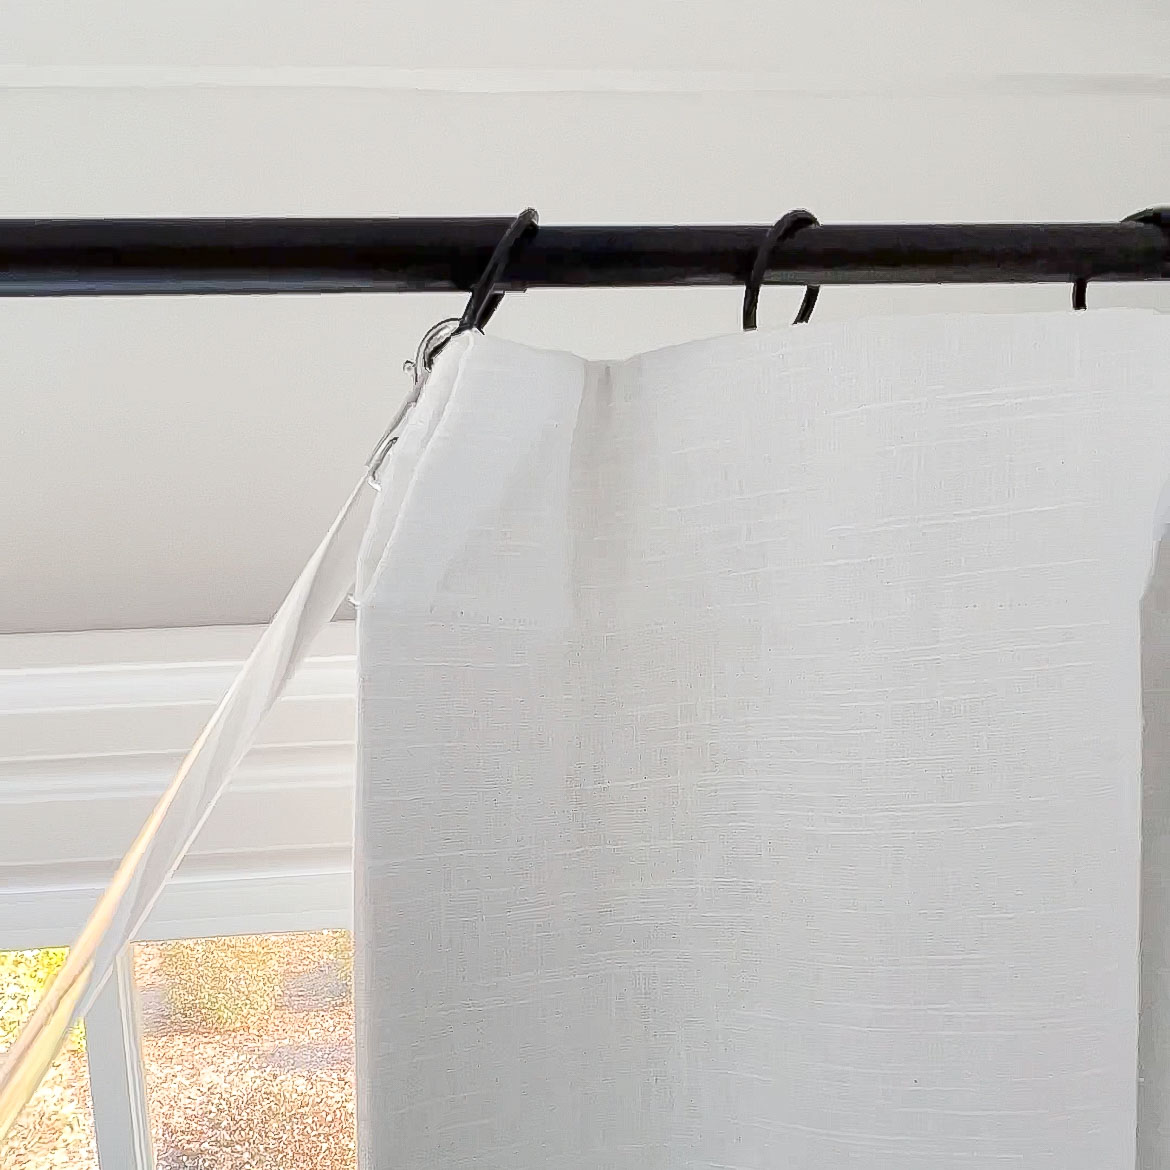 How to fix catching curtain rings - Ezy Glide Tape 